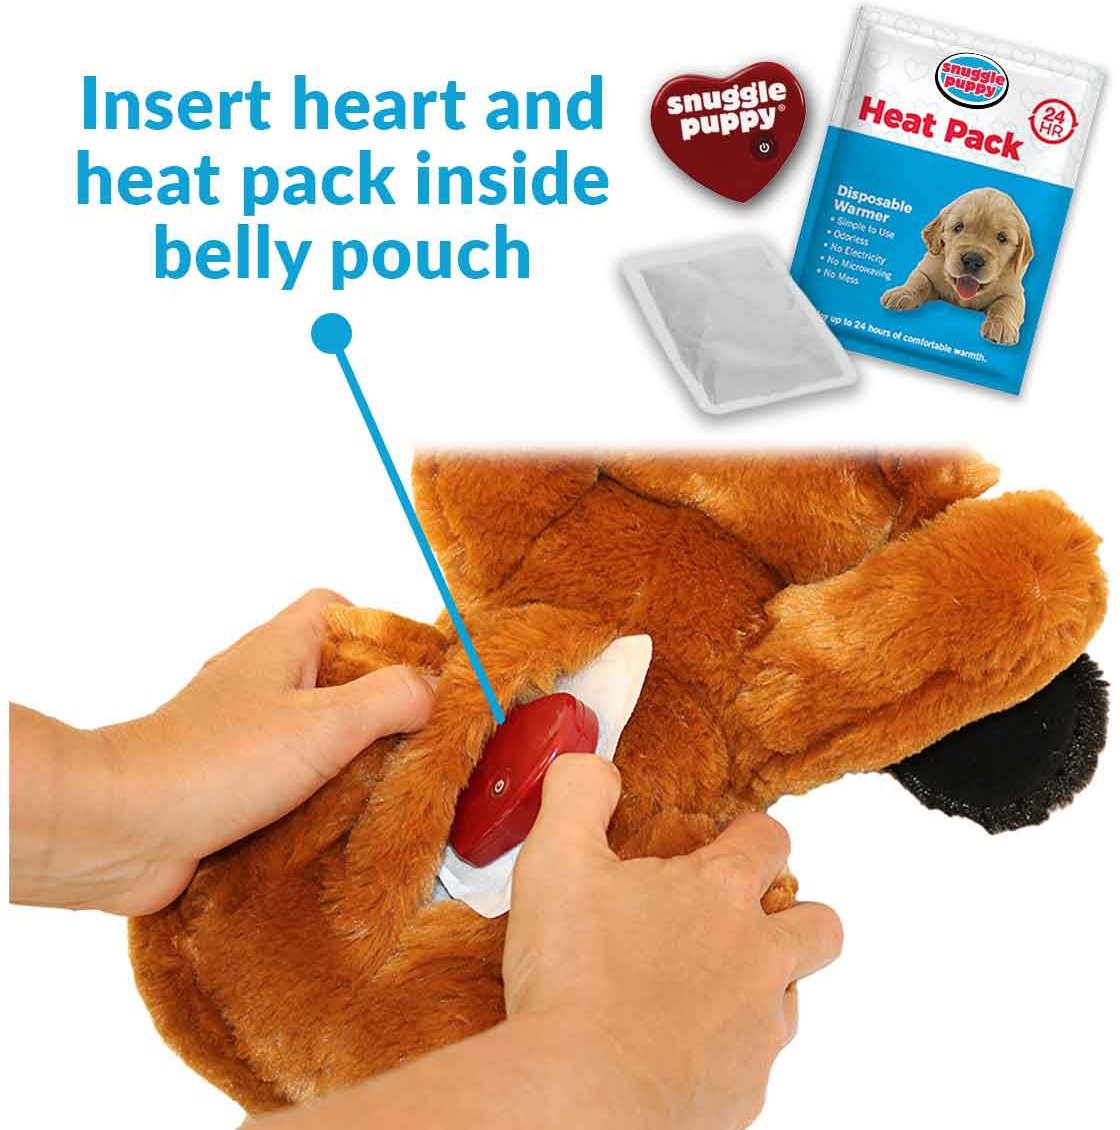 SMART PET LOVE Snuggle Puppy Behavioral Aid Dog Toy, Brown & White